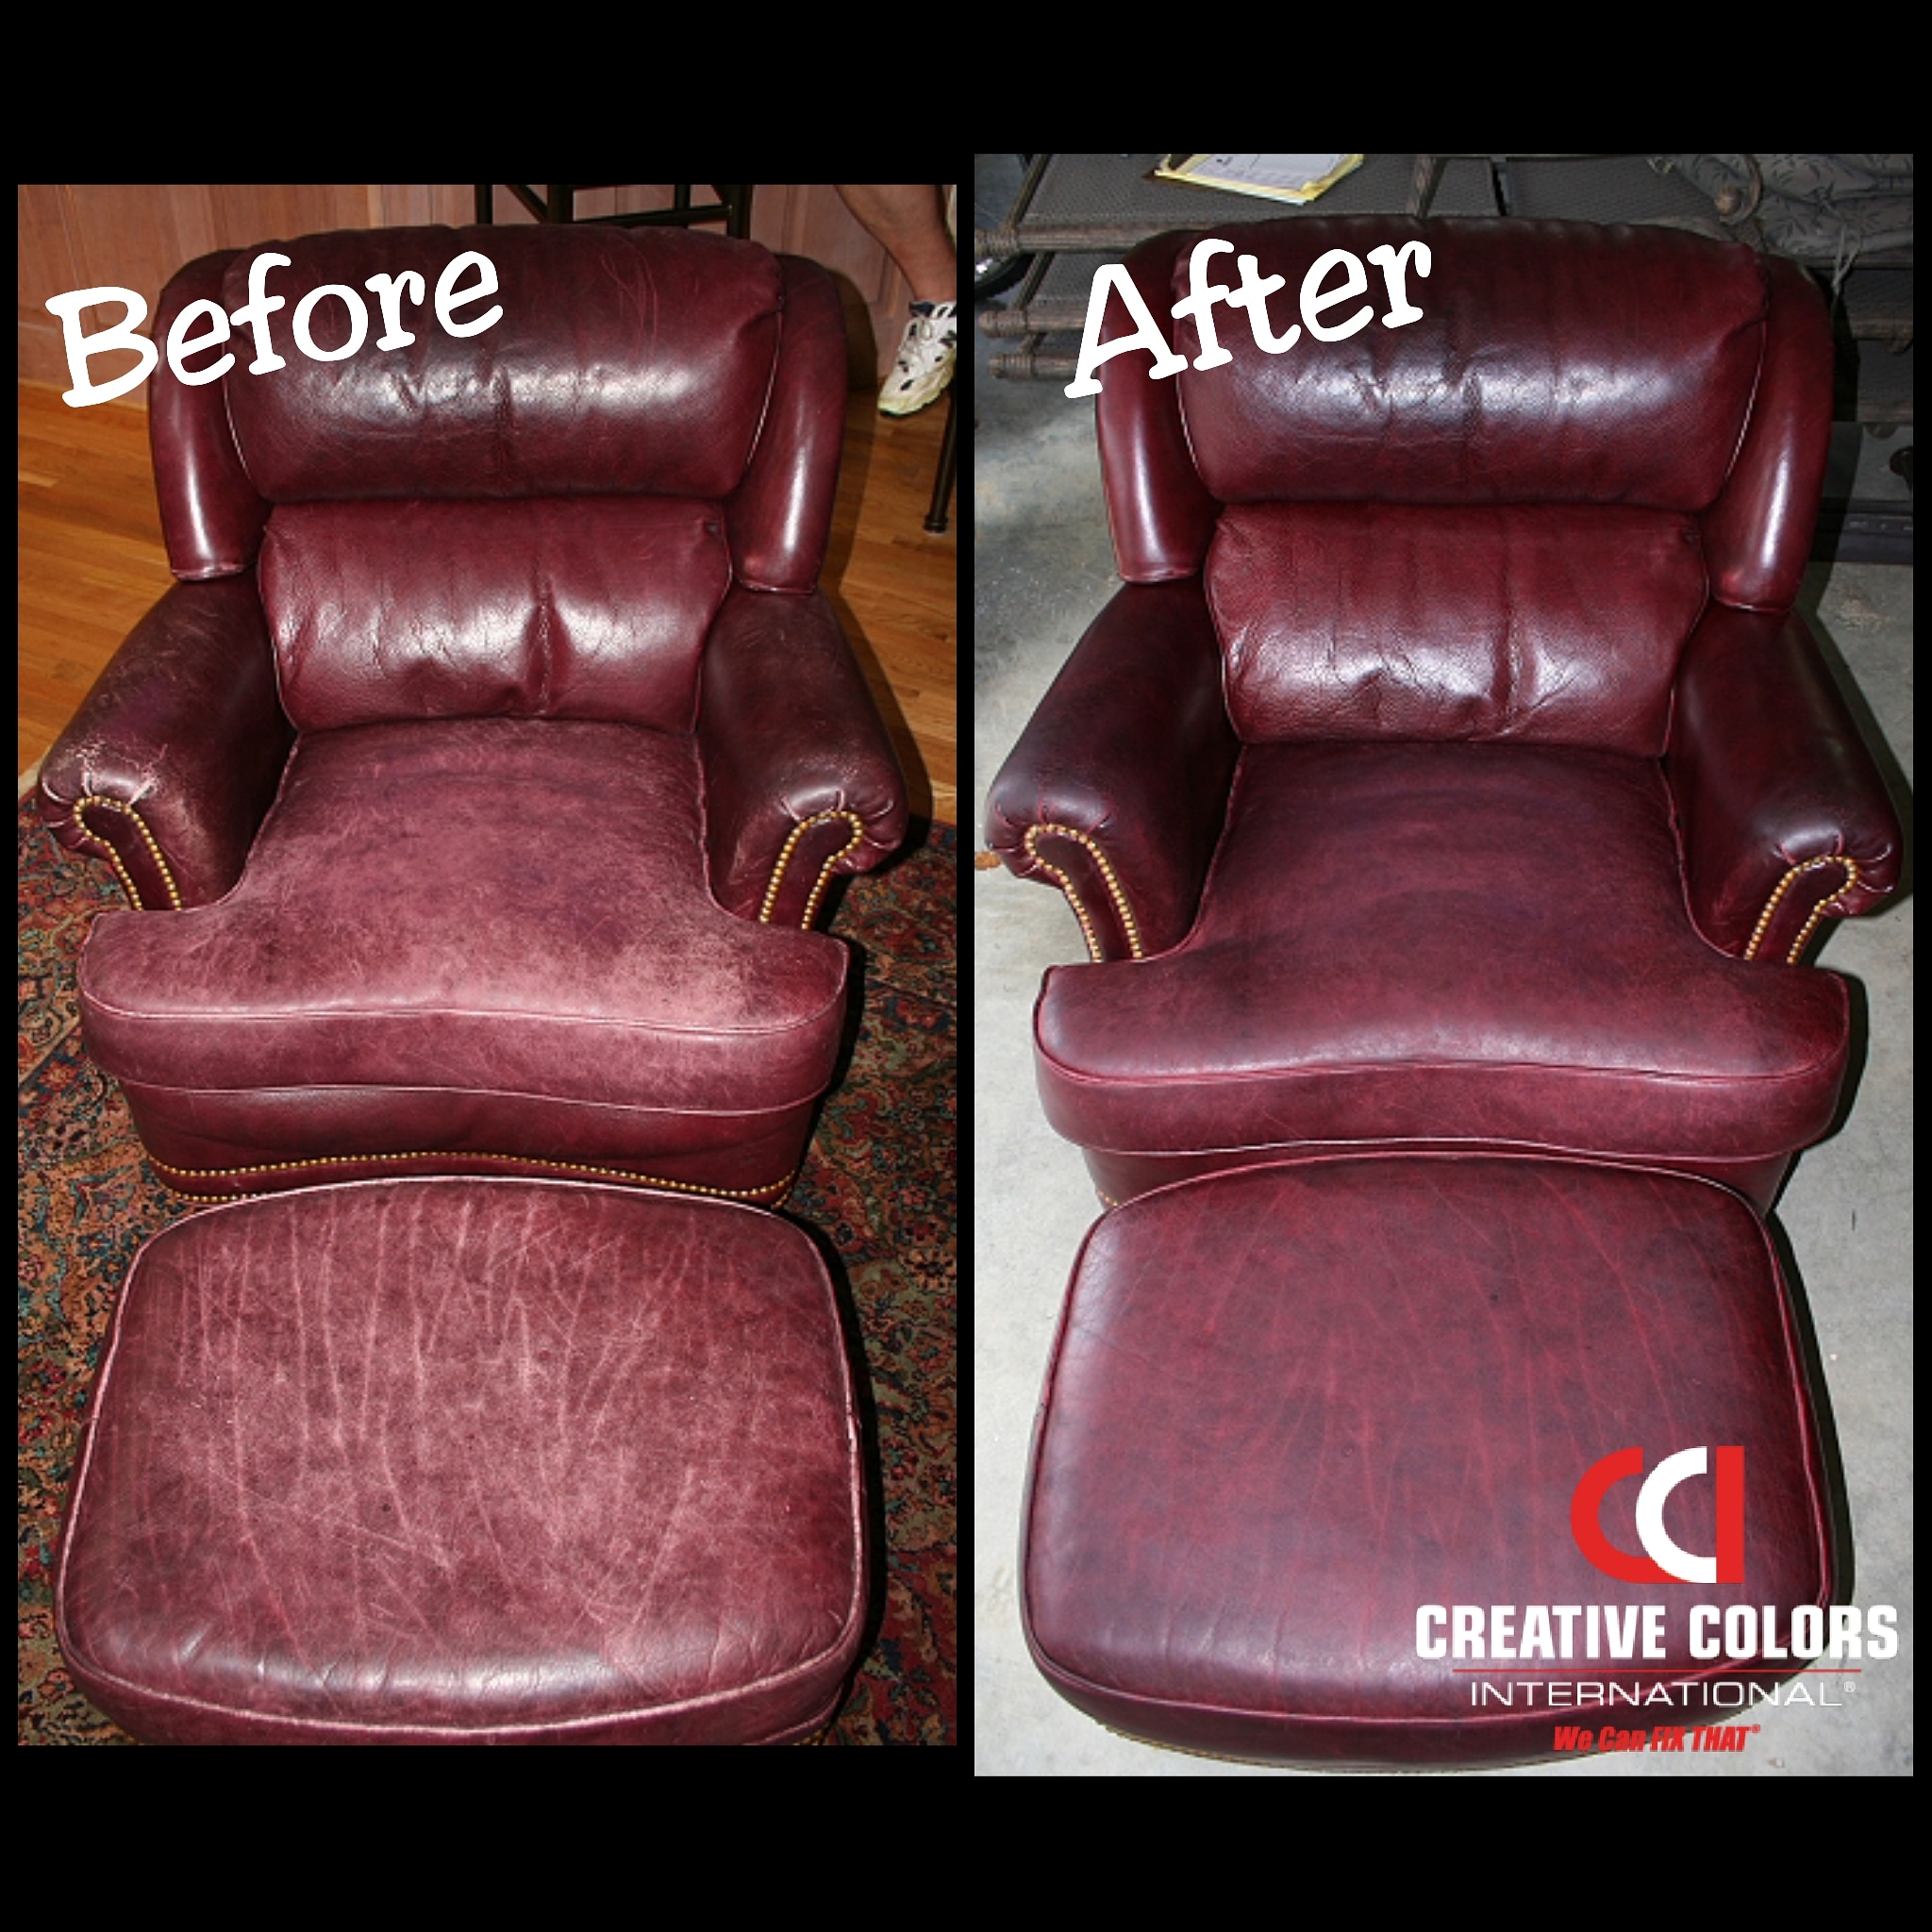 How Does Leather Color Restoration Work?